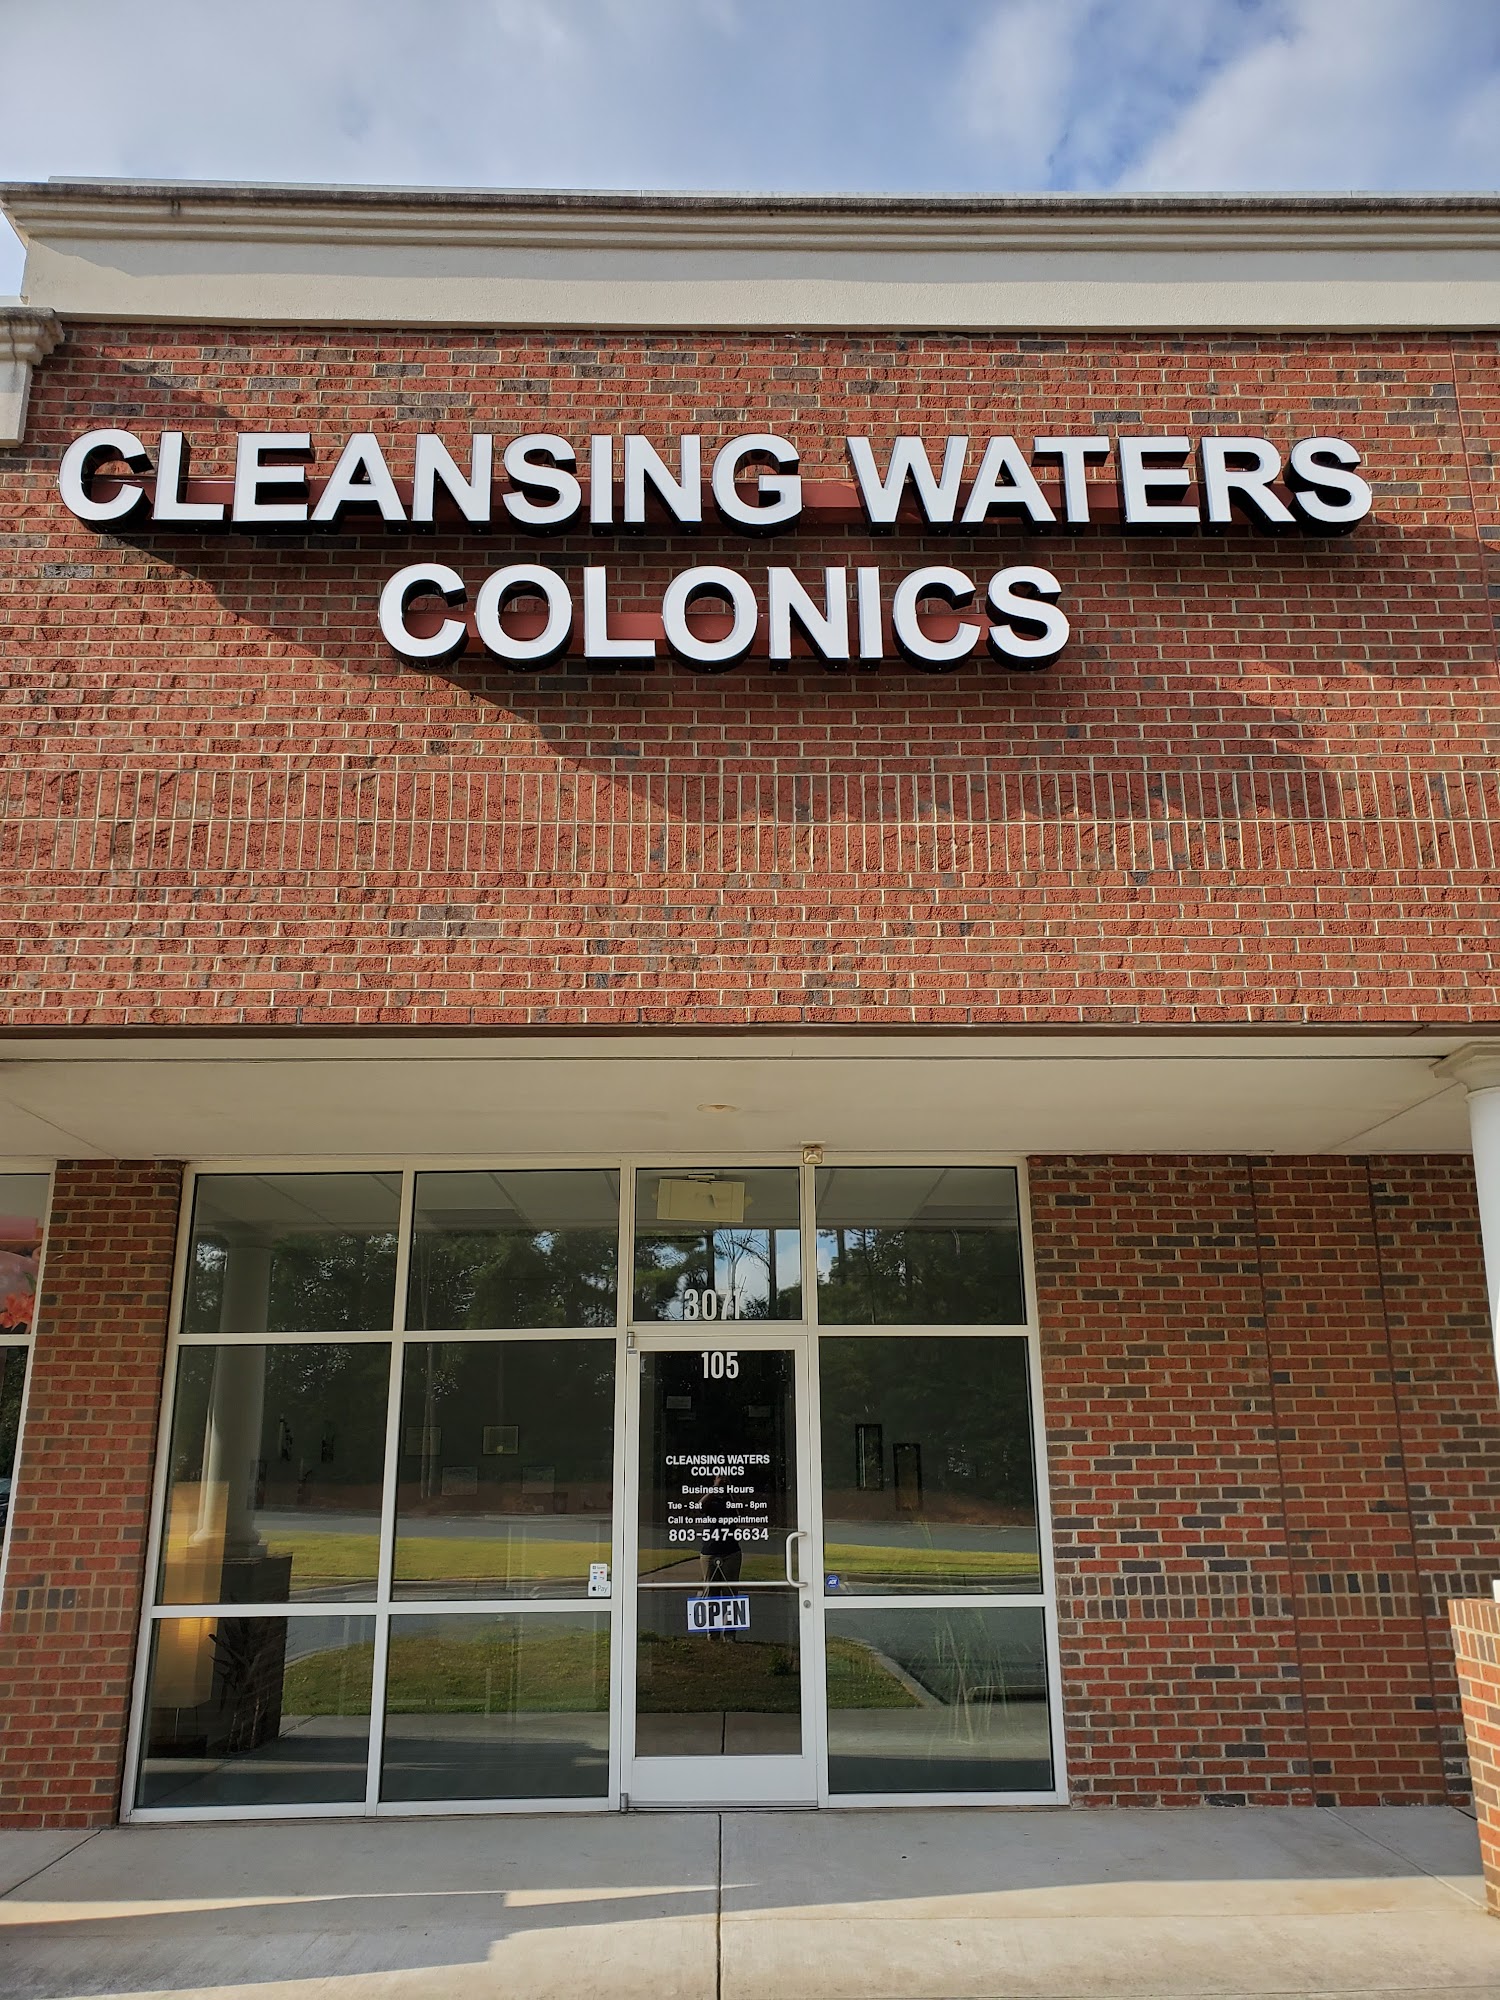 Cleansing Waters Colonics